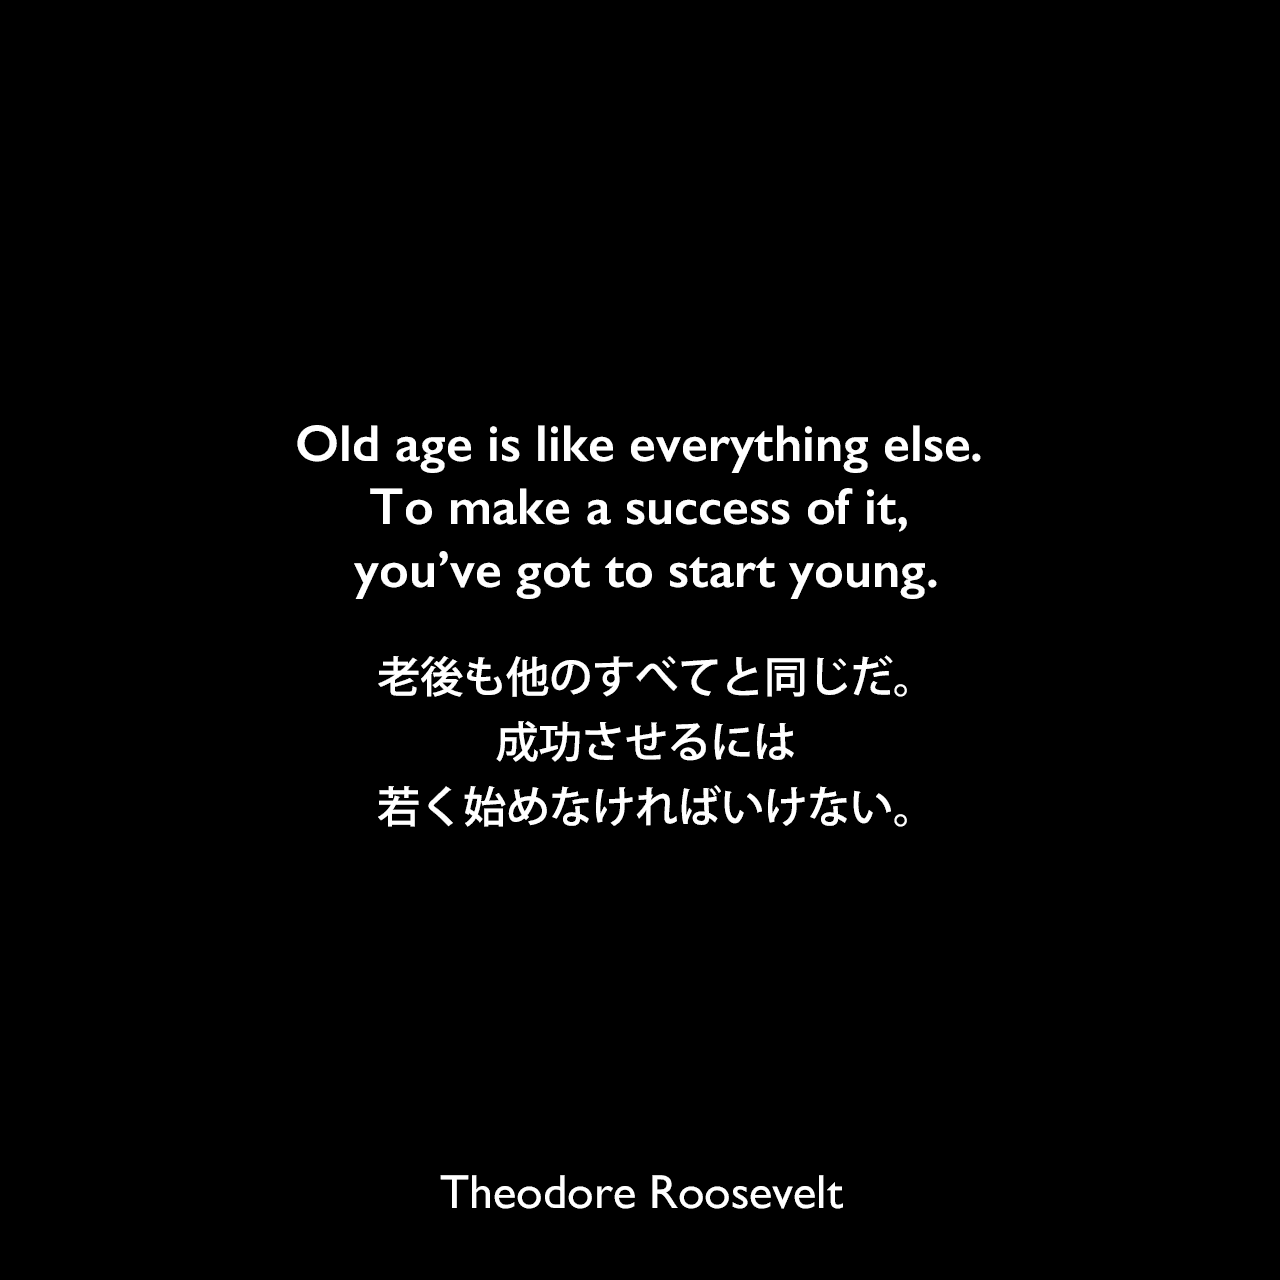 Old age is like everything else. To make a success of it, you’ve got to start young.老後も他のすべてと同じだ。成功させるには、若く始めなければいけない。Theodore Roosevelt